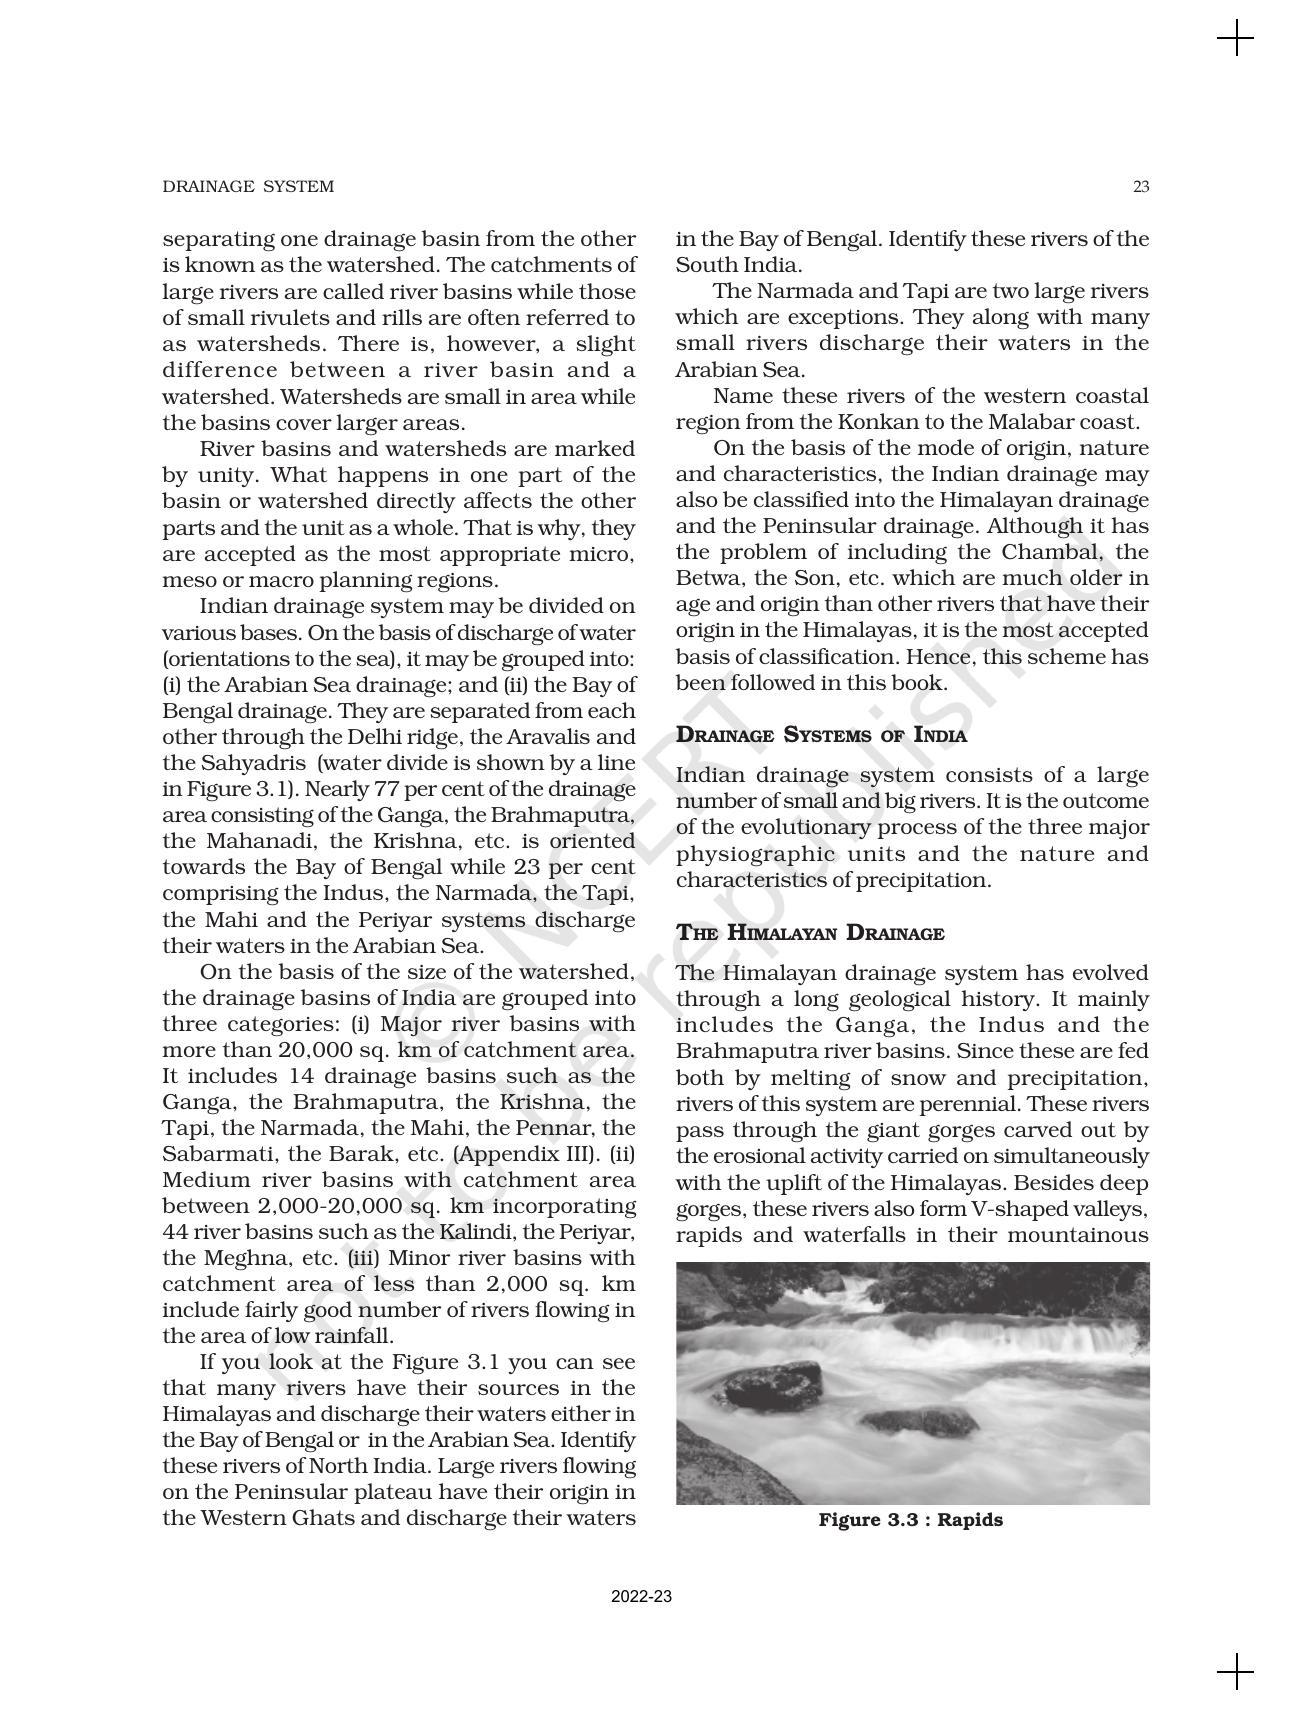 NCERT Book for Class 11 Geography (Part-II) Chapter 3 Drainage System - Page 3